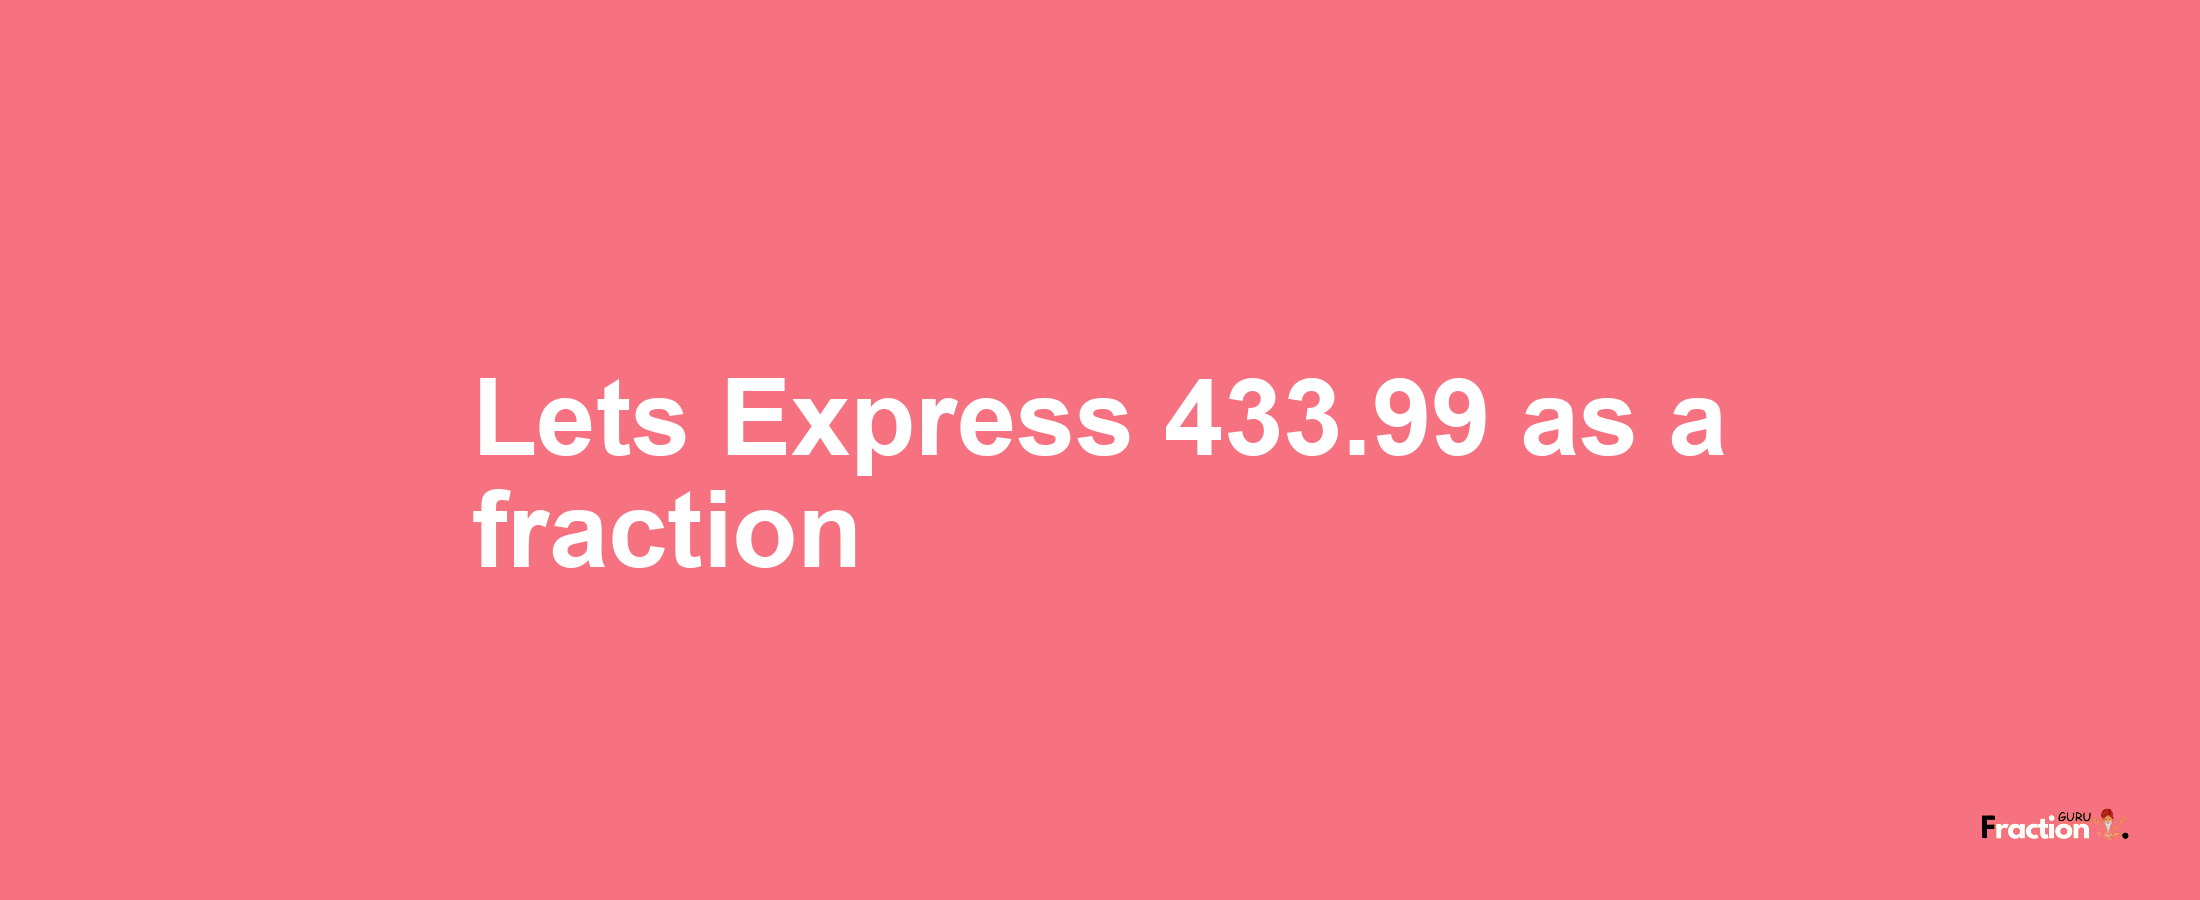 Lets Express 433.99 as afraction